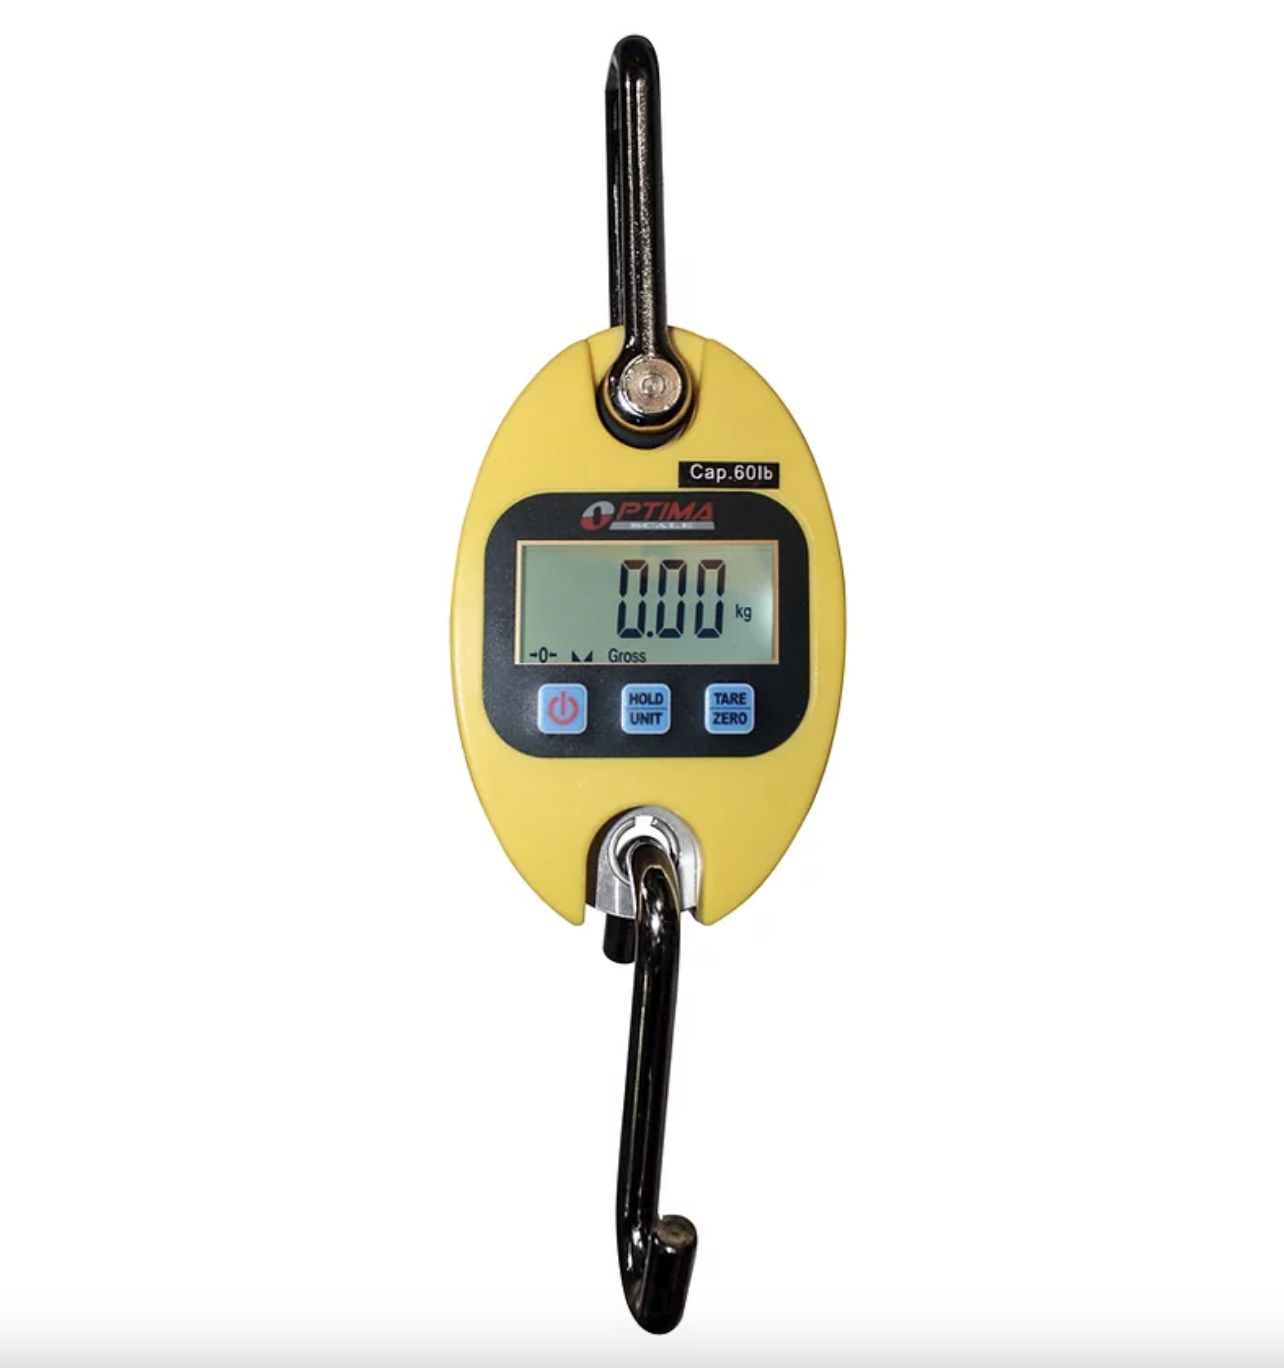 OP-931 Portable Industrial Hanging Scale - Prime USA Scales